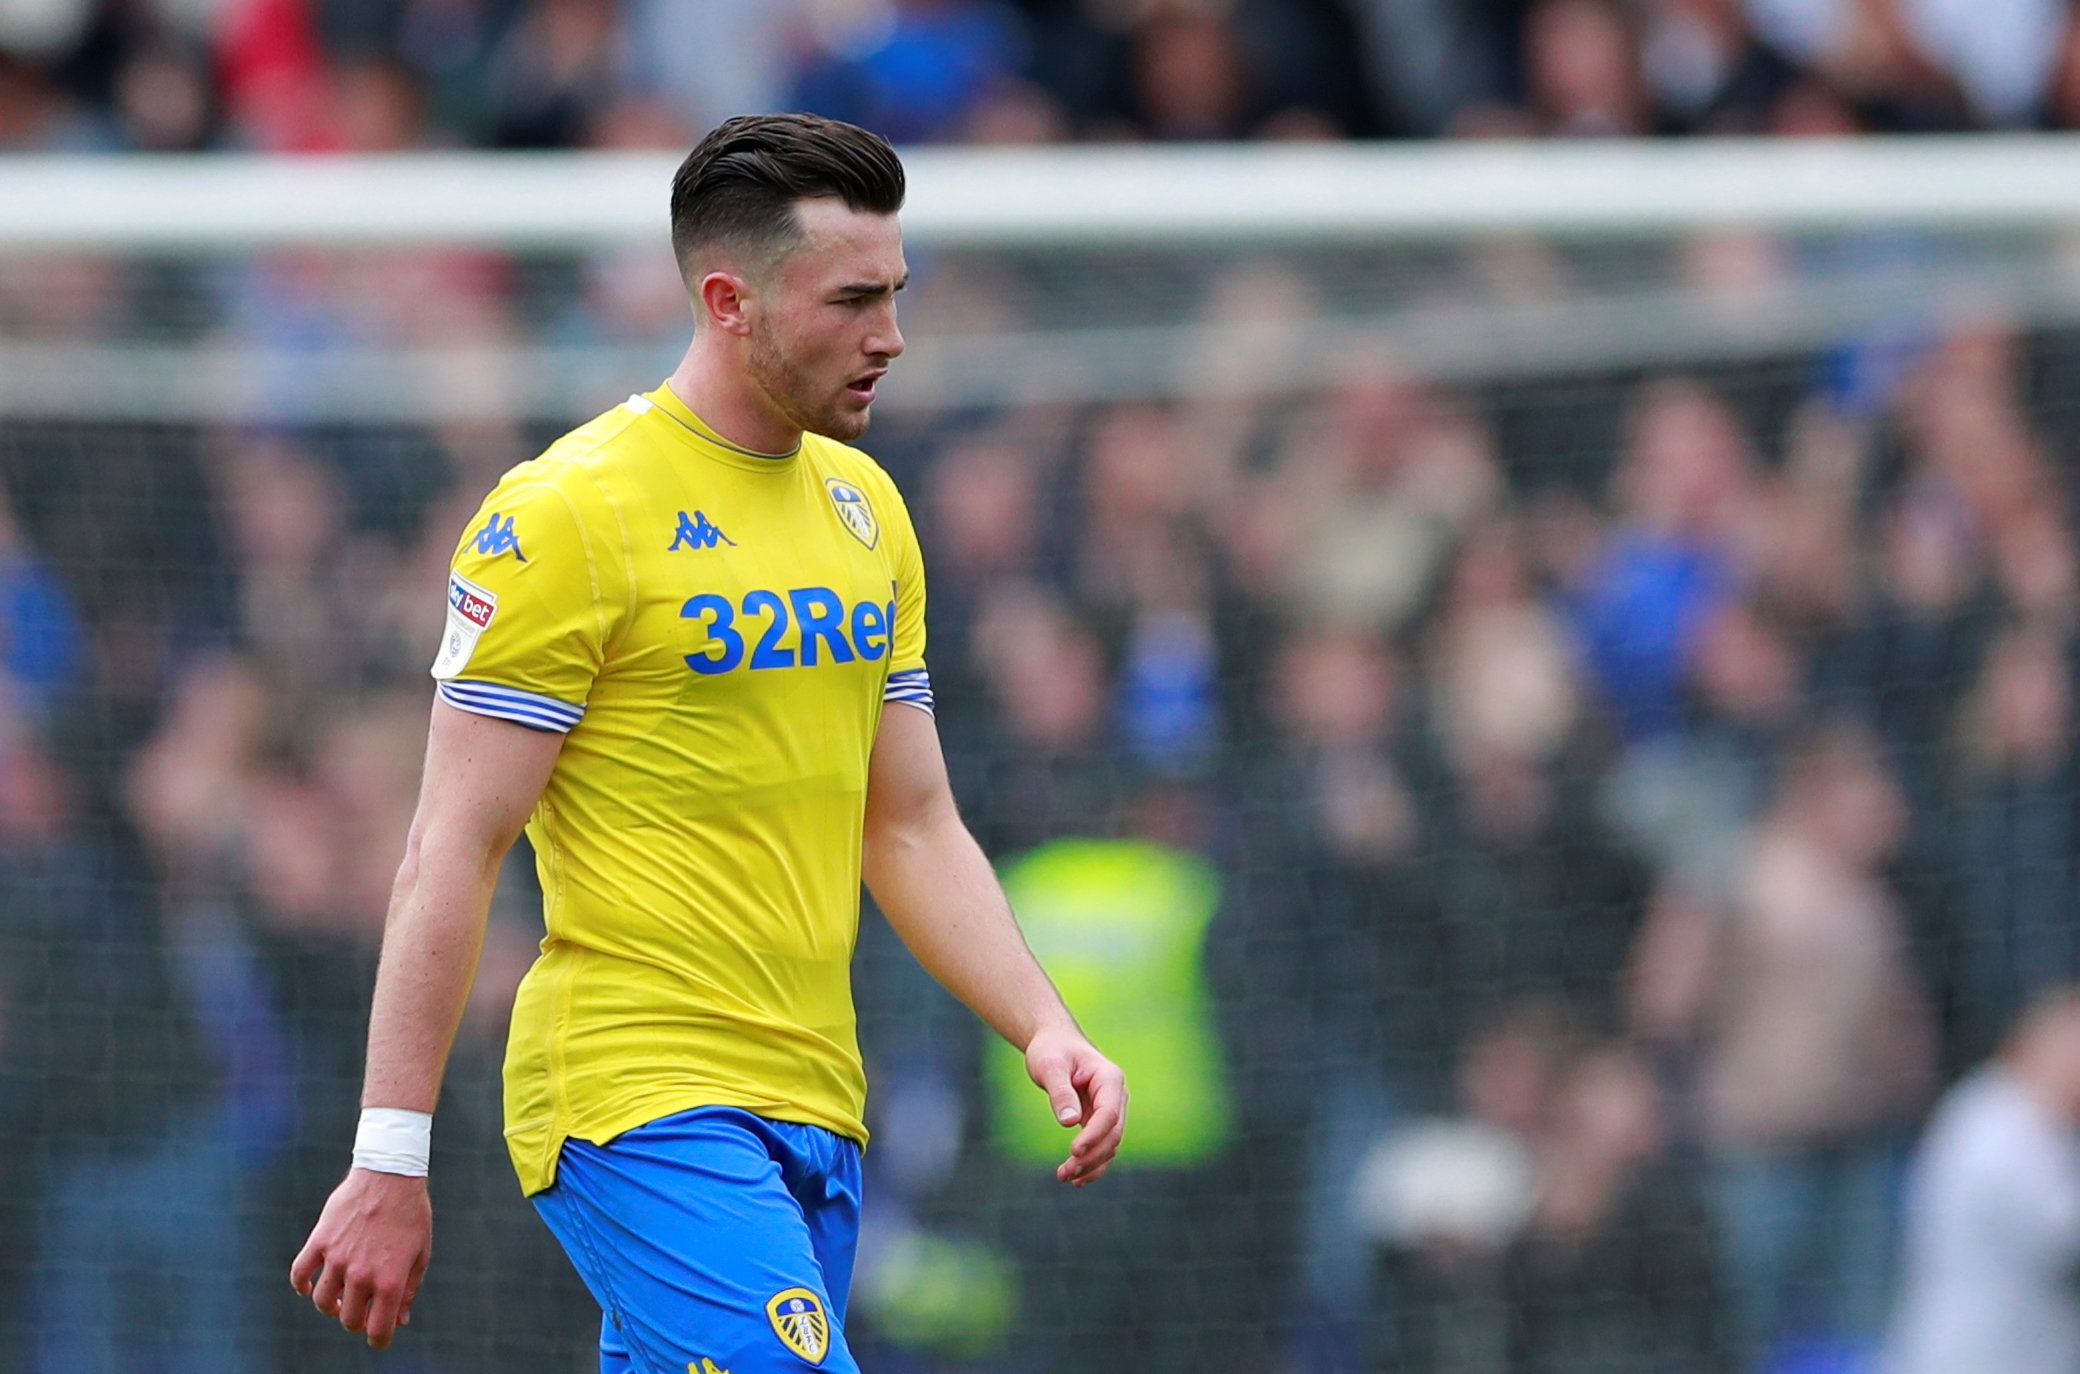 Soccer Football - Championship - Ipswich Town v Leeds United - Portman Road, Ipswich, Britain - May 5, 2019   Leeds United's Jack Harrison reacts   Action Images/Andrew Couldridge    EDITORIAL USE ONLY. No use with unauthorized audio, video, data, fixture lists, club/league logos or 